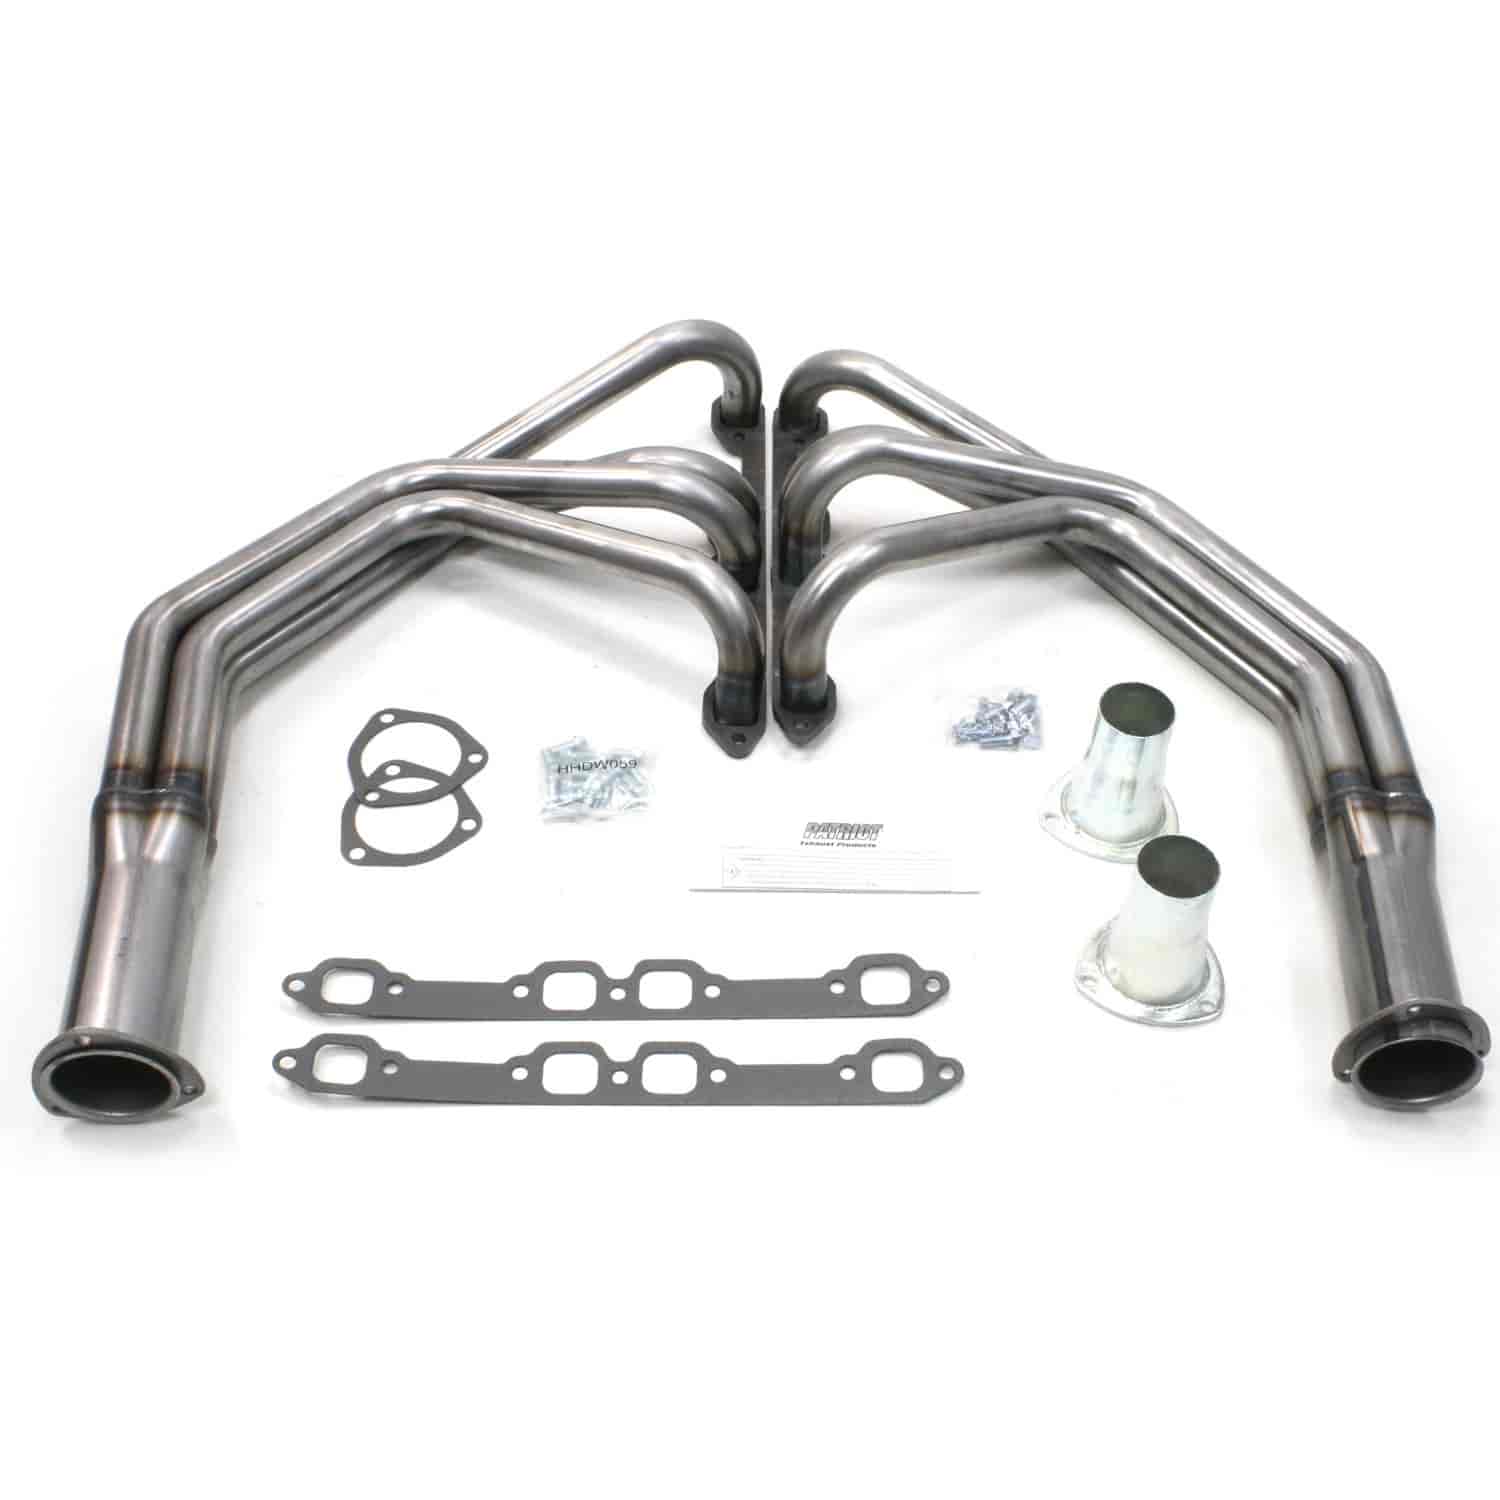 Ford Specific Fit Headers 1954-1964 Ford Pickup Truck